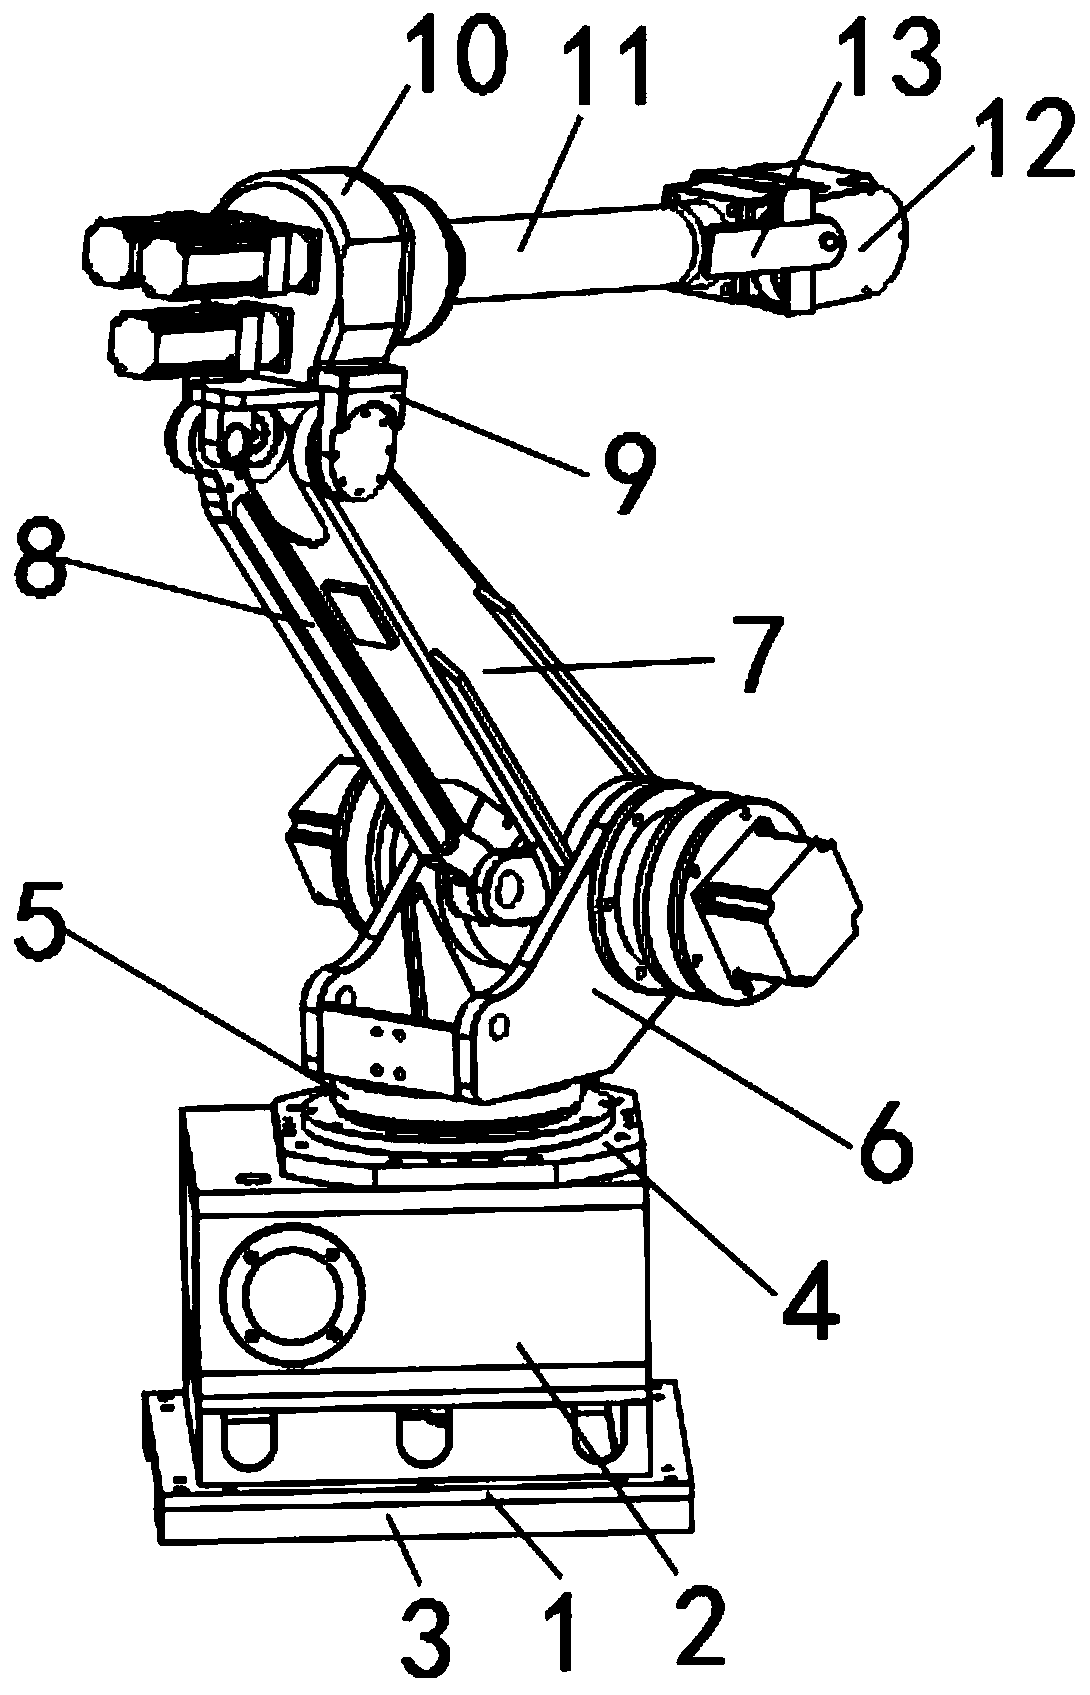 Mechanical arm assembly used for automated production